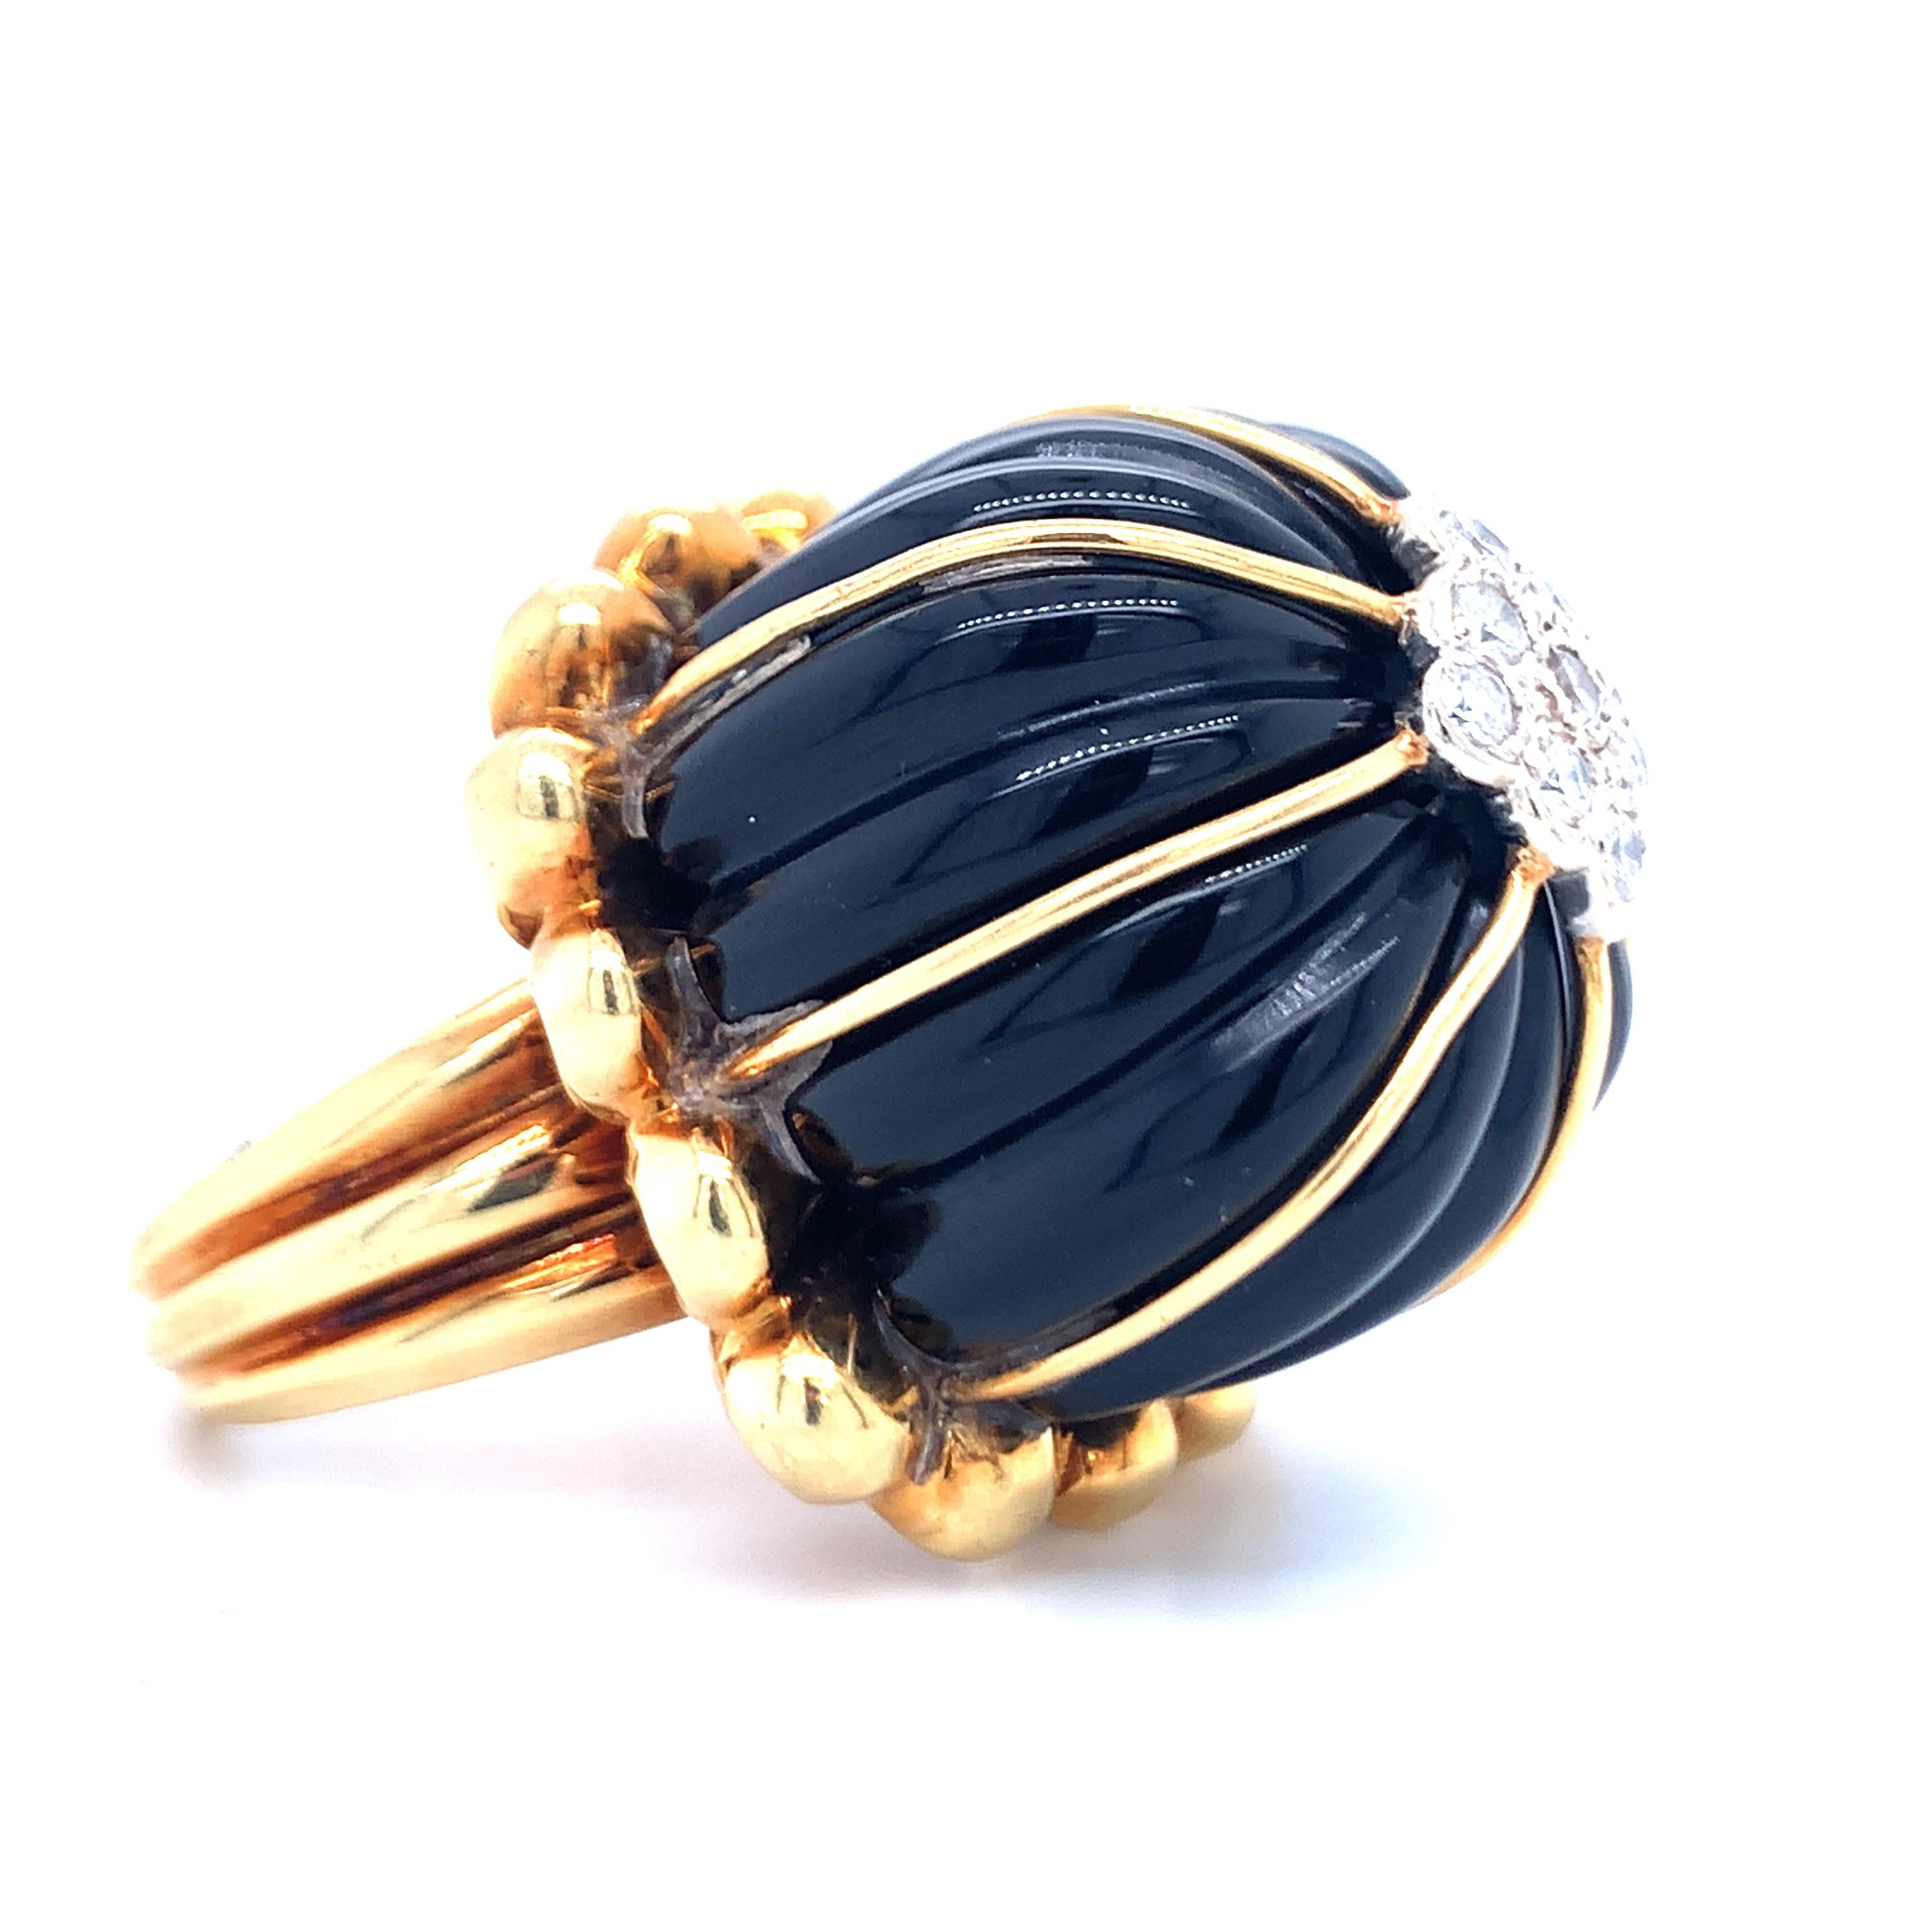 Black onyx and diamond 18K yellow gold ring featuring a dome shaped, high dimension onyx portion featuring a diamond encrusted top featuring nine round brilliant cut diamonds totaling 0.30 ct. with H color and VS-2 clarity. Completed with a puffed,